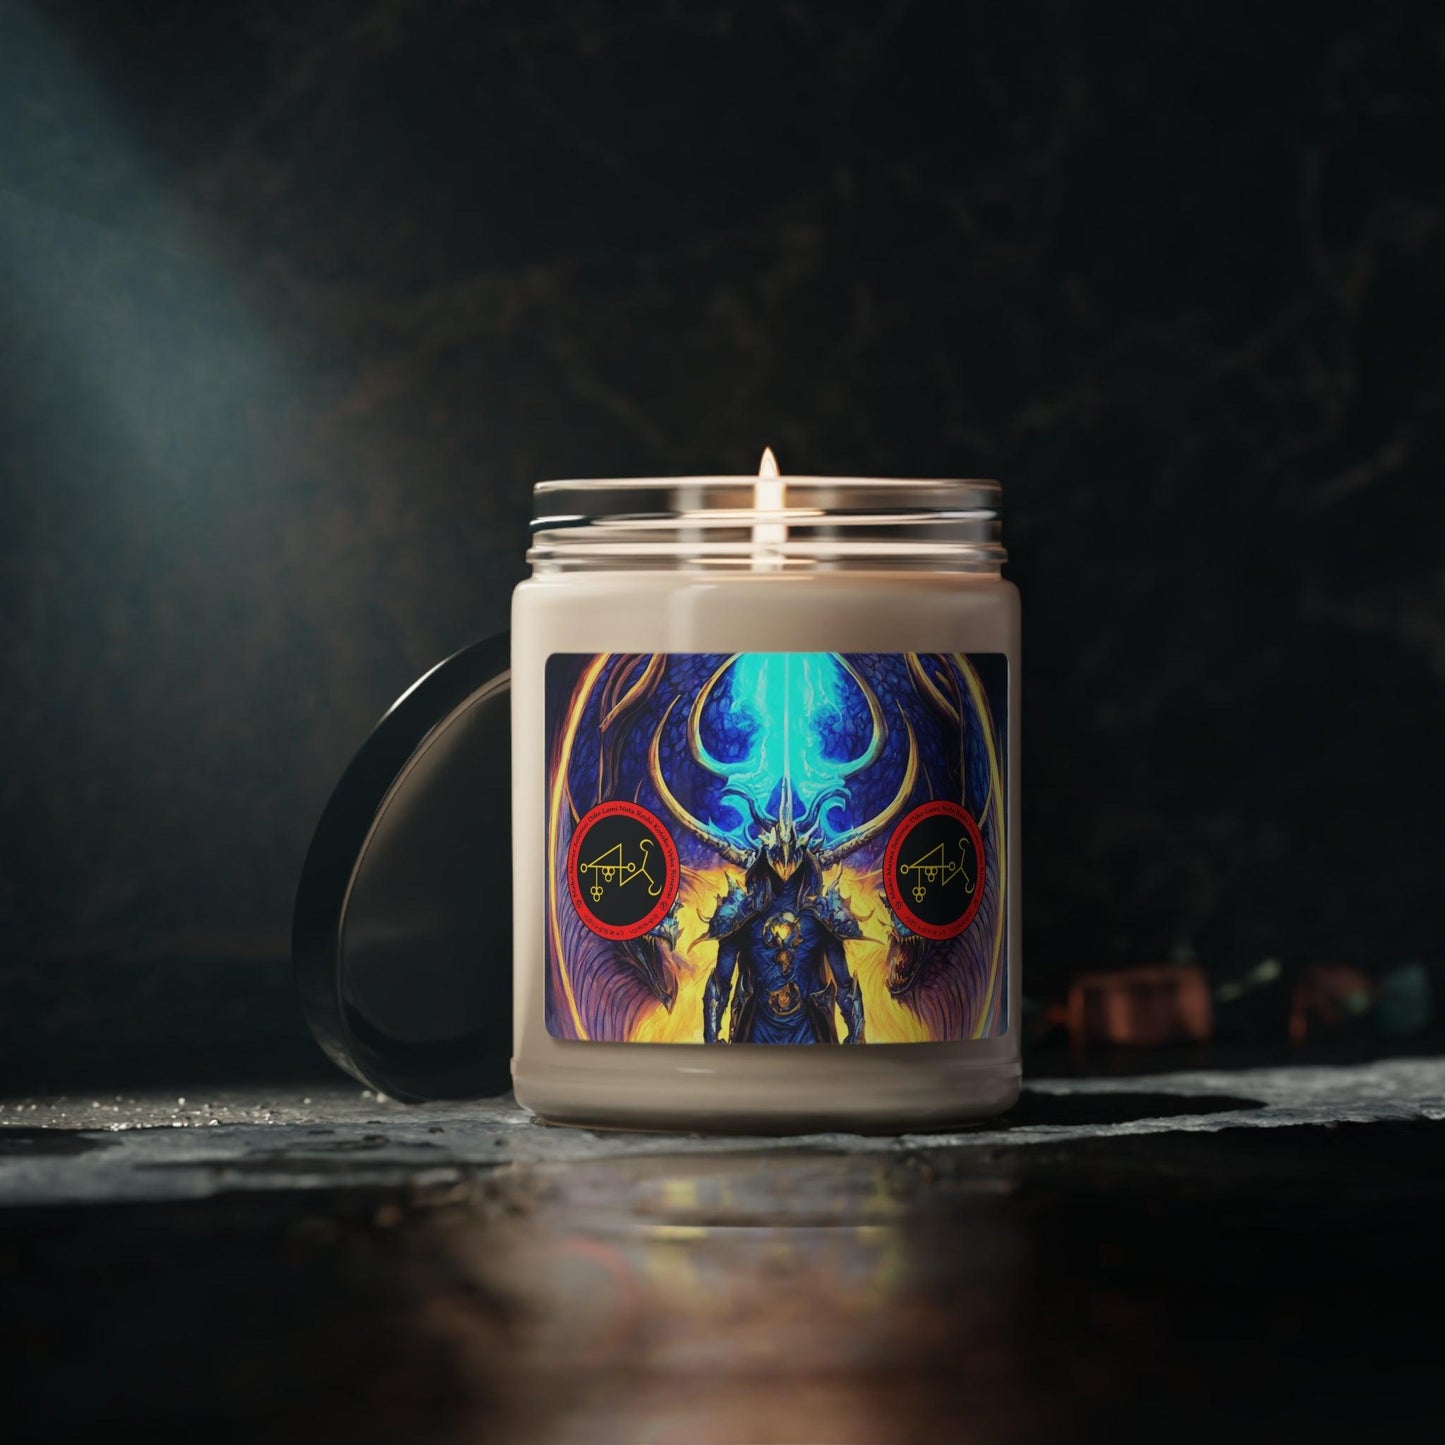 Demon-Marax-Altar-Scented-Soyed-Candle-To-Learn-Magic-and-witchcraft-in-προσφορές-τελετουργίες-μύηση-ή-προσευχή-και-διαλογισμός-20